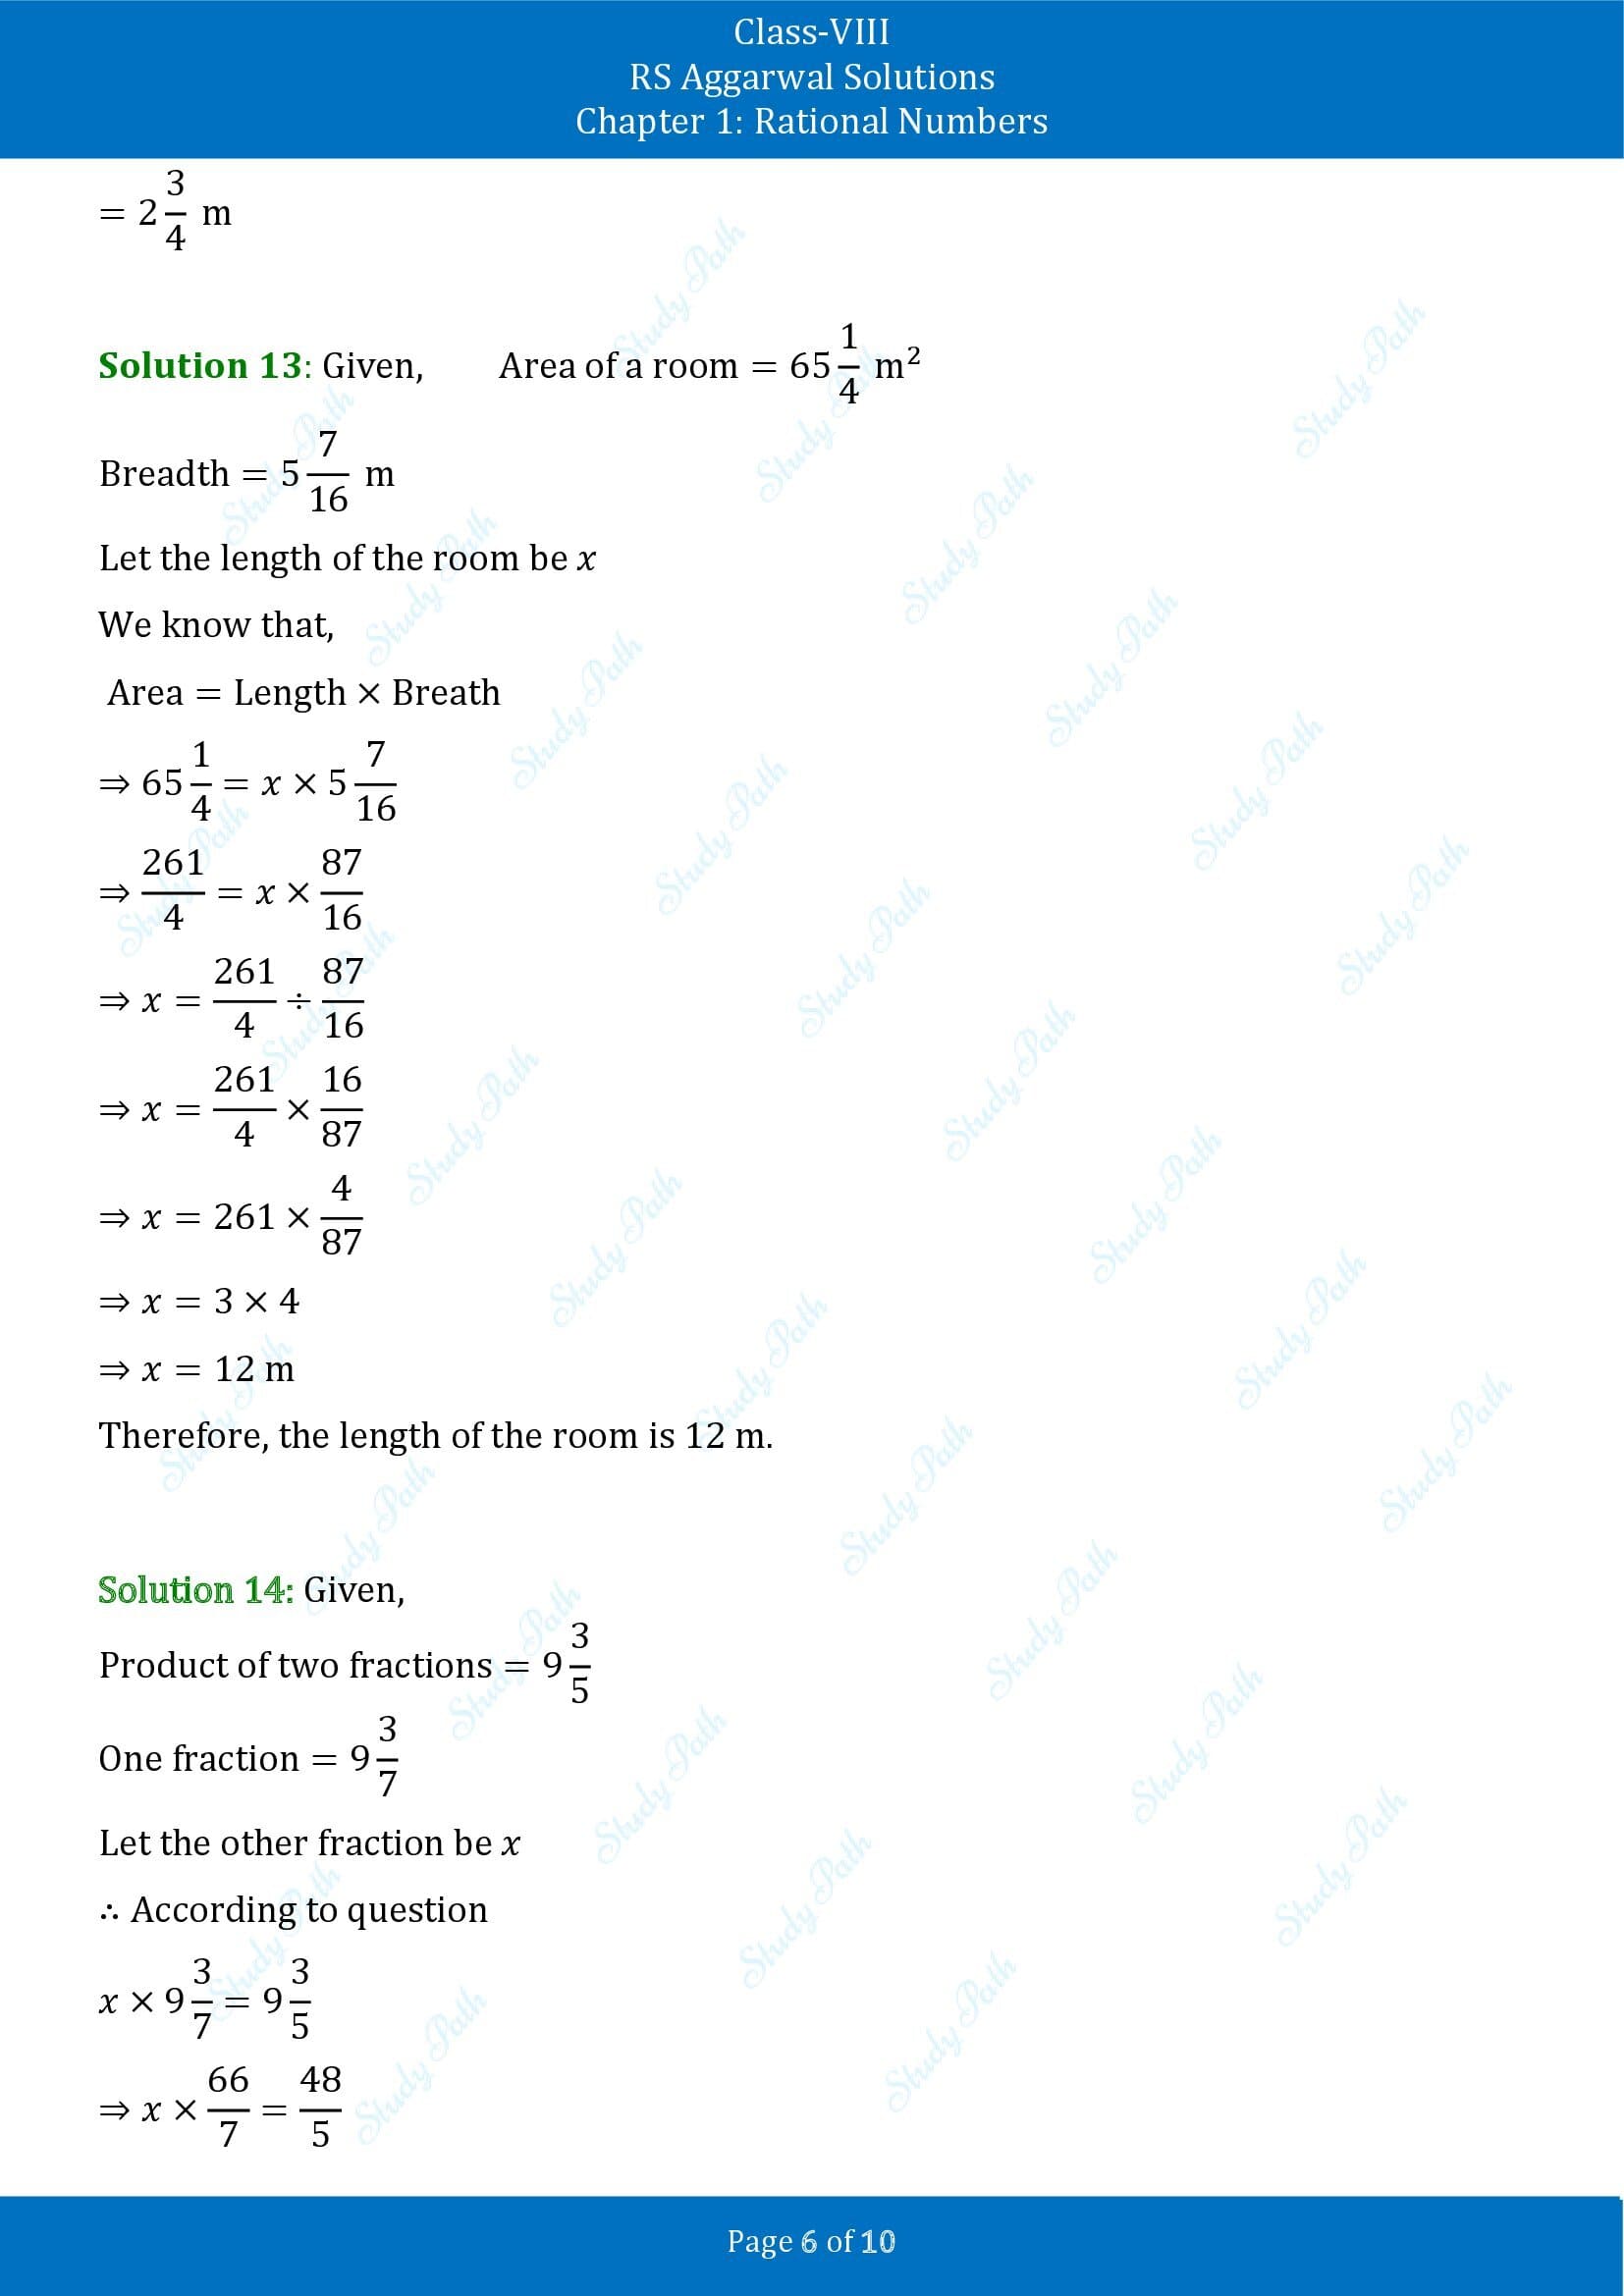 RS Aggarwal Solutions Class 8 Chapter 1 Rational Numbers Exercise 1G 00006